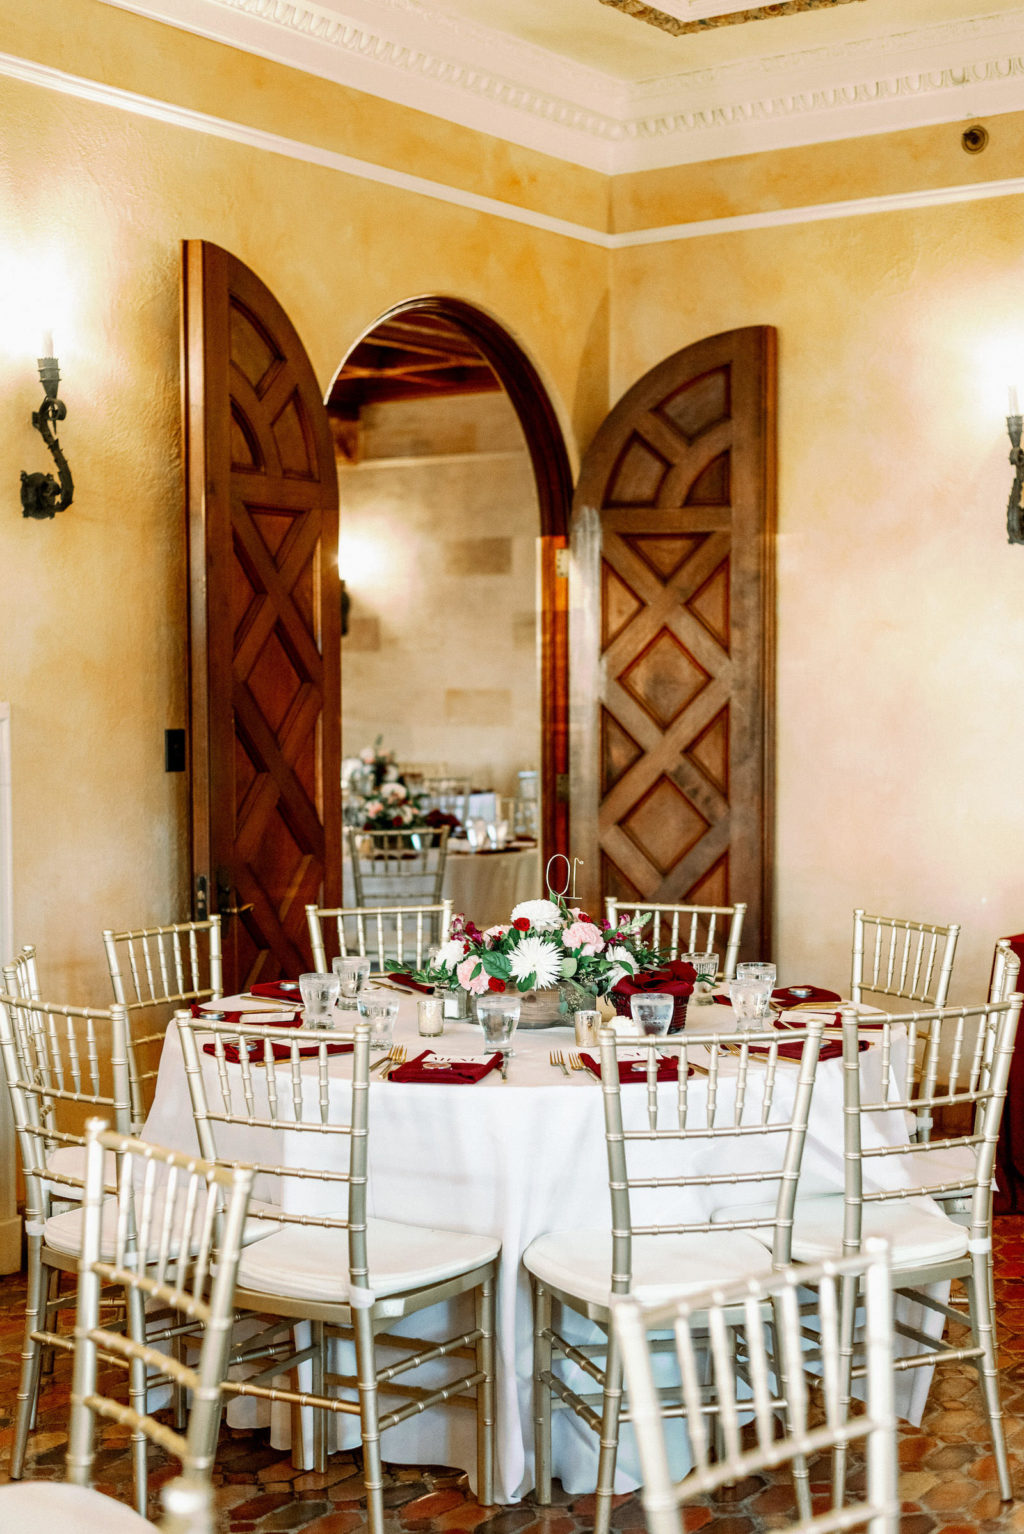 Timeless Romantic Wedding Reception Decor, Round Tables with White Linens, Gold Chiavari Chairs, Floral Burgundy Red, Pink and White Floral Centerpieces | Tampa Bay Wedding Photographer Dewitt for Love Photography | Sarasota Wedding Venue Powel Crosley Estate